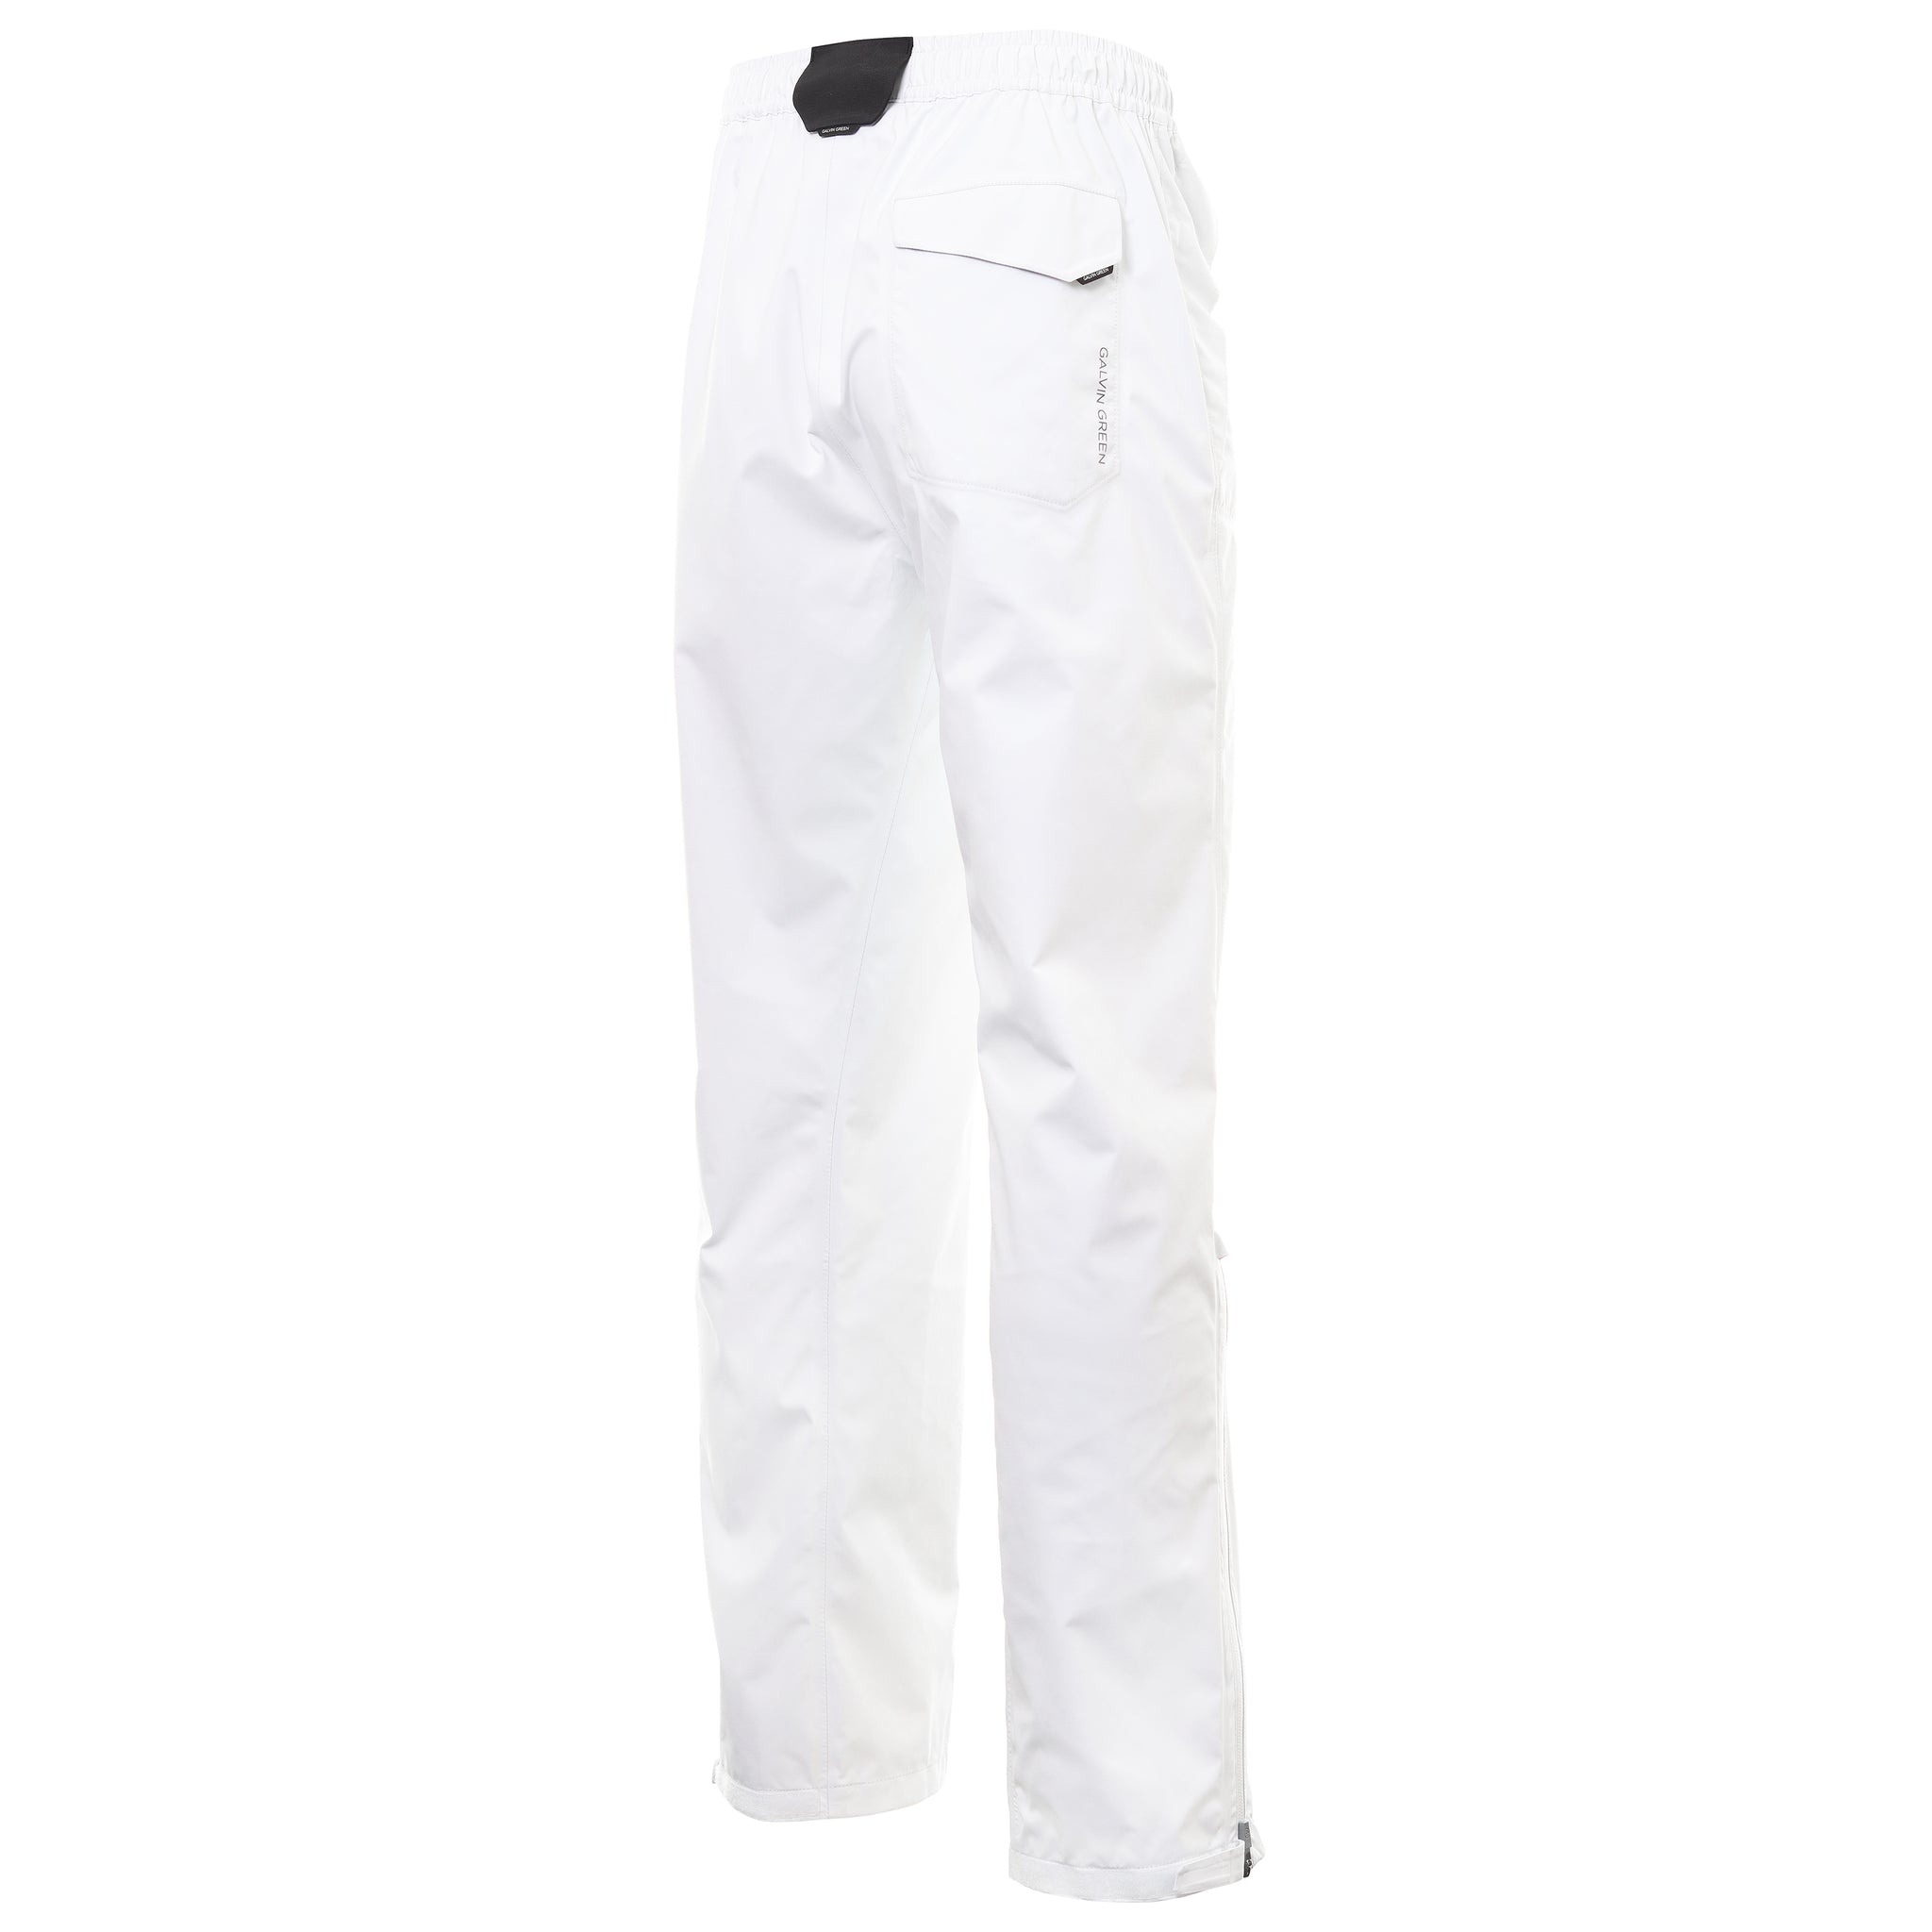 galvin-green-arthur-paclite-stretch-gore-tex-waterproof-trousers-white-9409